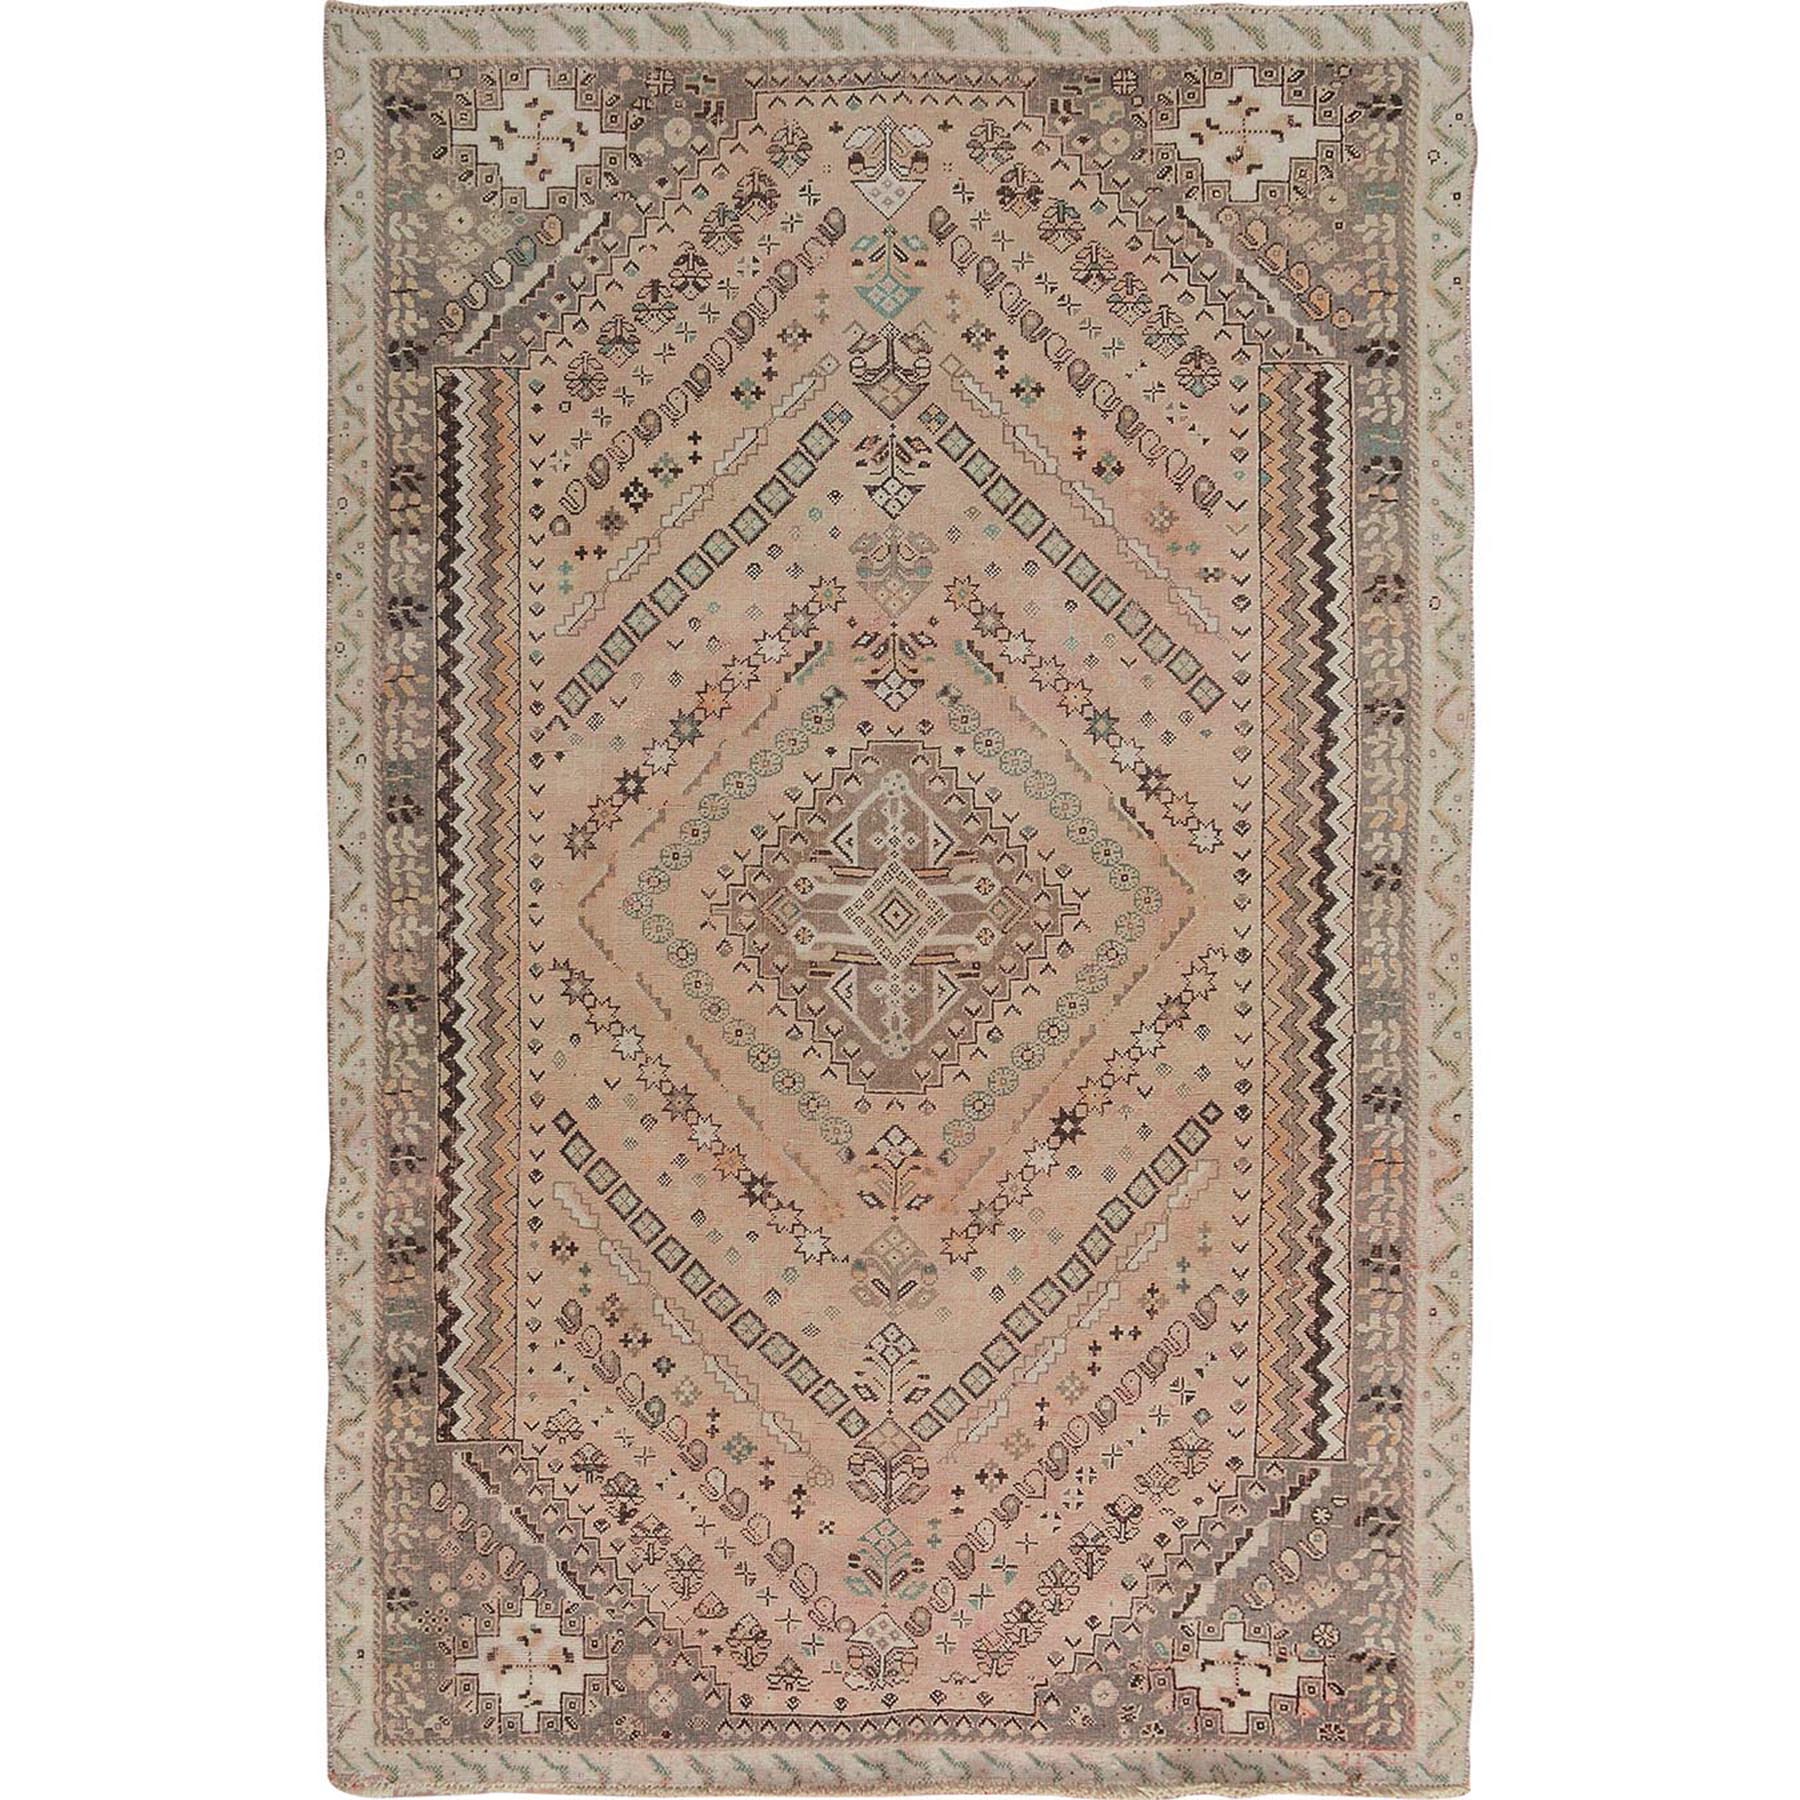 5'1"X7'10" Natural Colors Vintage And Worn Down Persian Shiraz Hand Knotted Oriental Rug moae7a0e